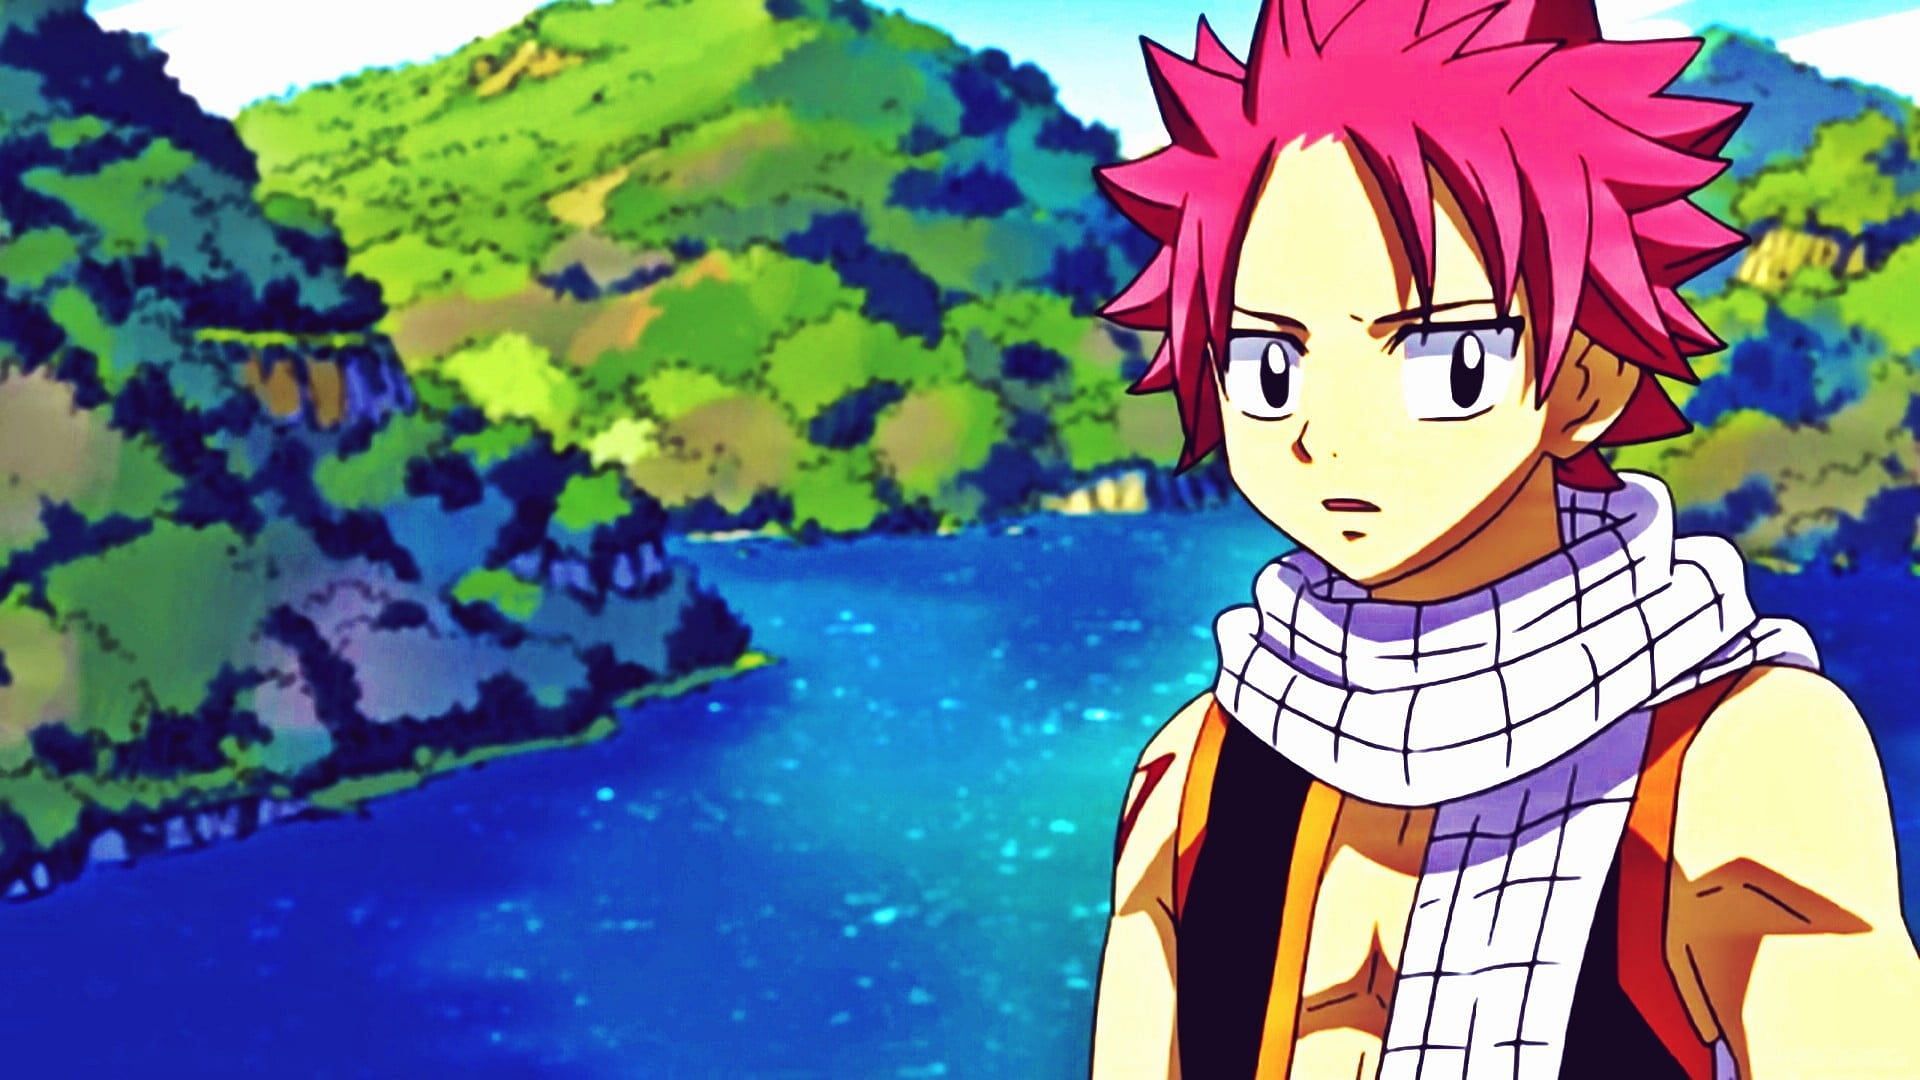 Natsu Dragneel (Image via A-1 Pictures and Satelight)